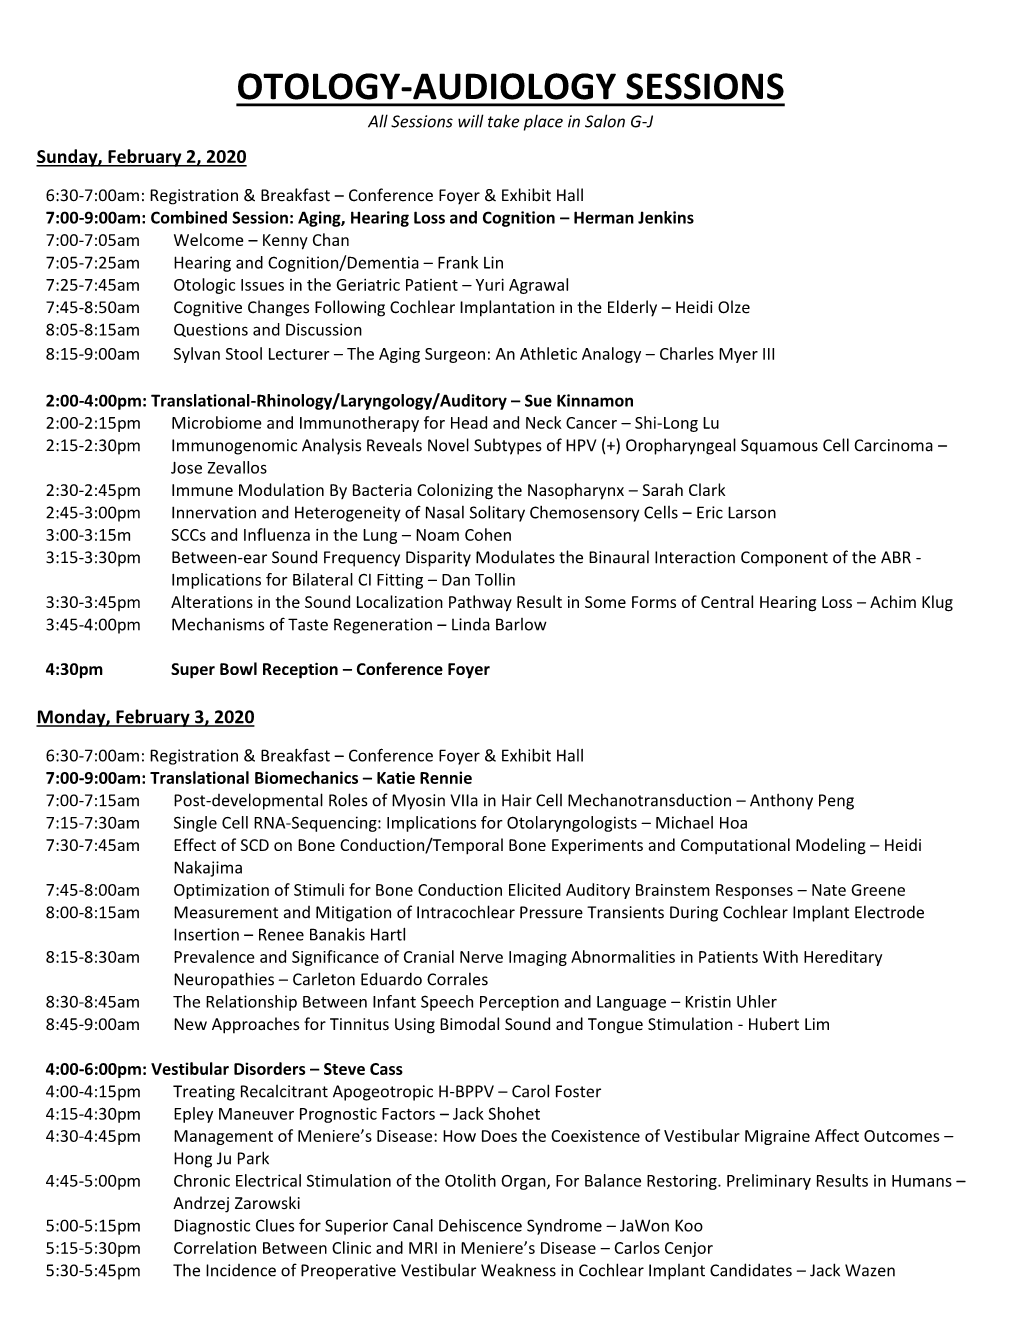 OTOLOGY-AUDIOLOGY SESSIONS All Sessions Will Take Place in Salon G-J Sunday, February 2, 2020